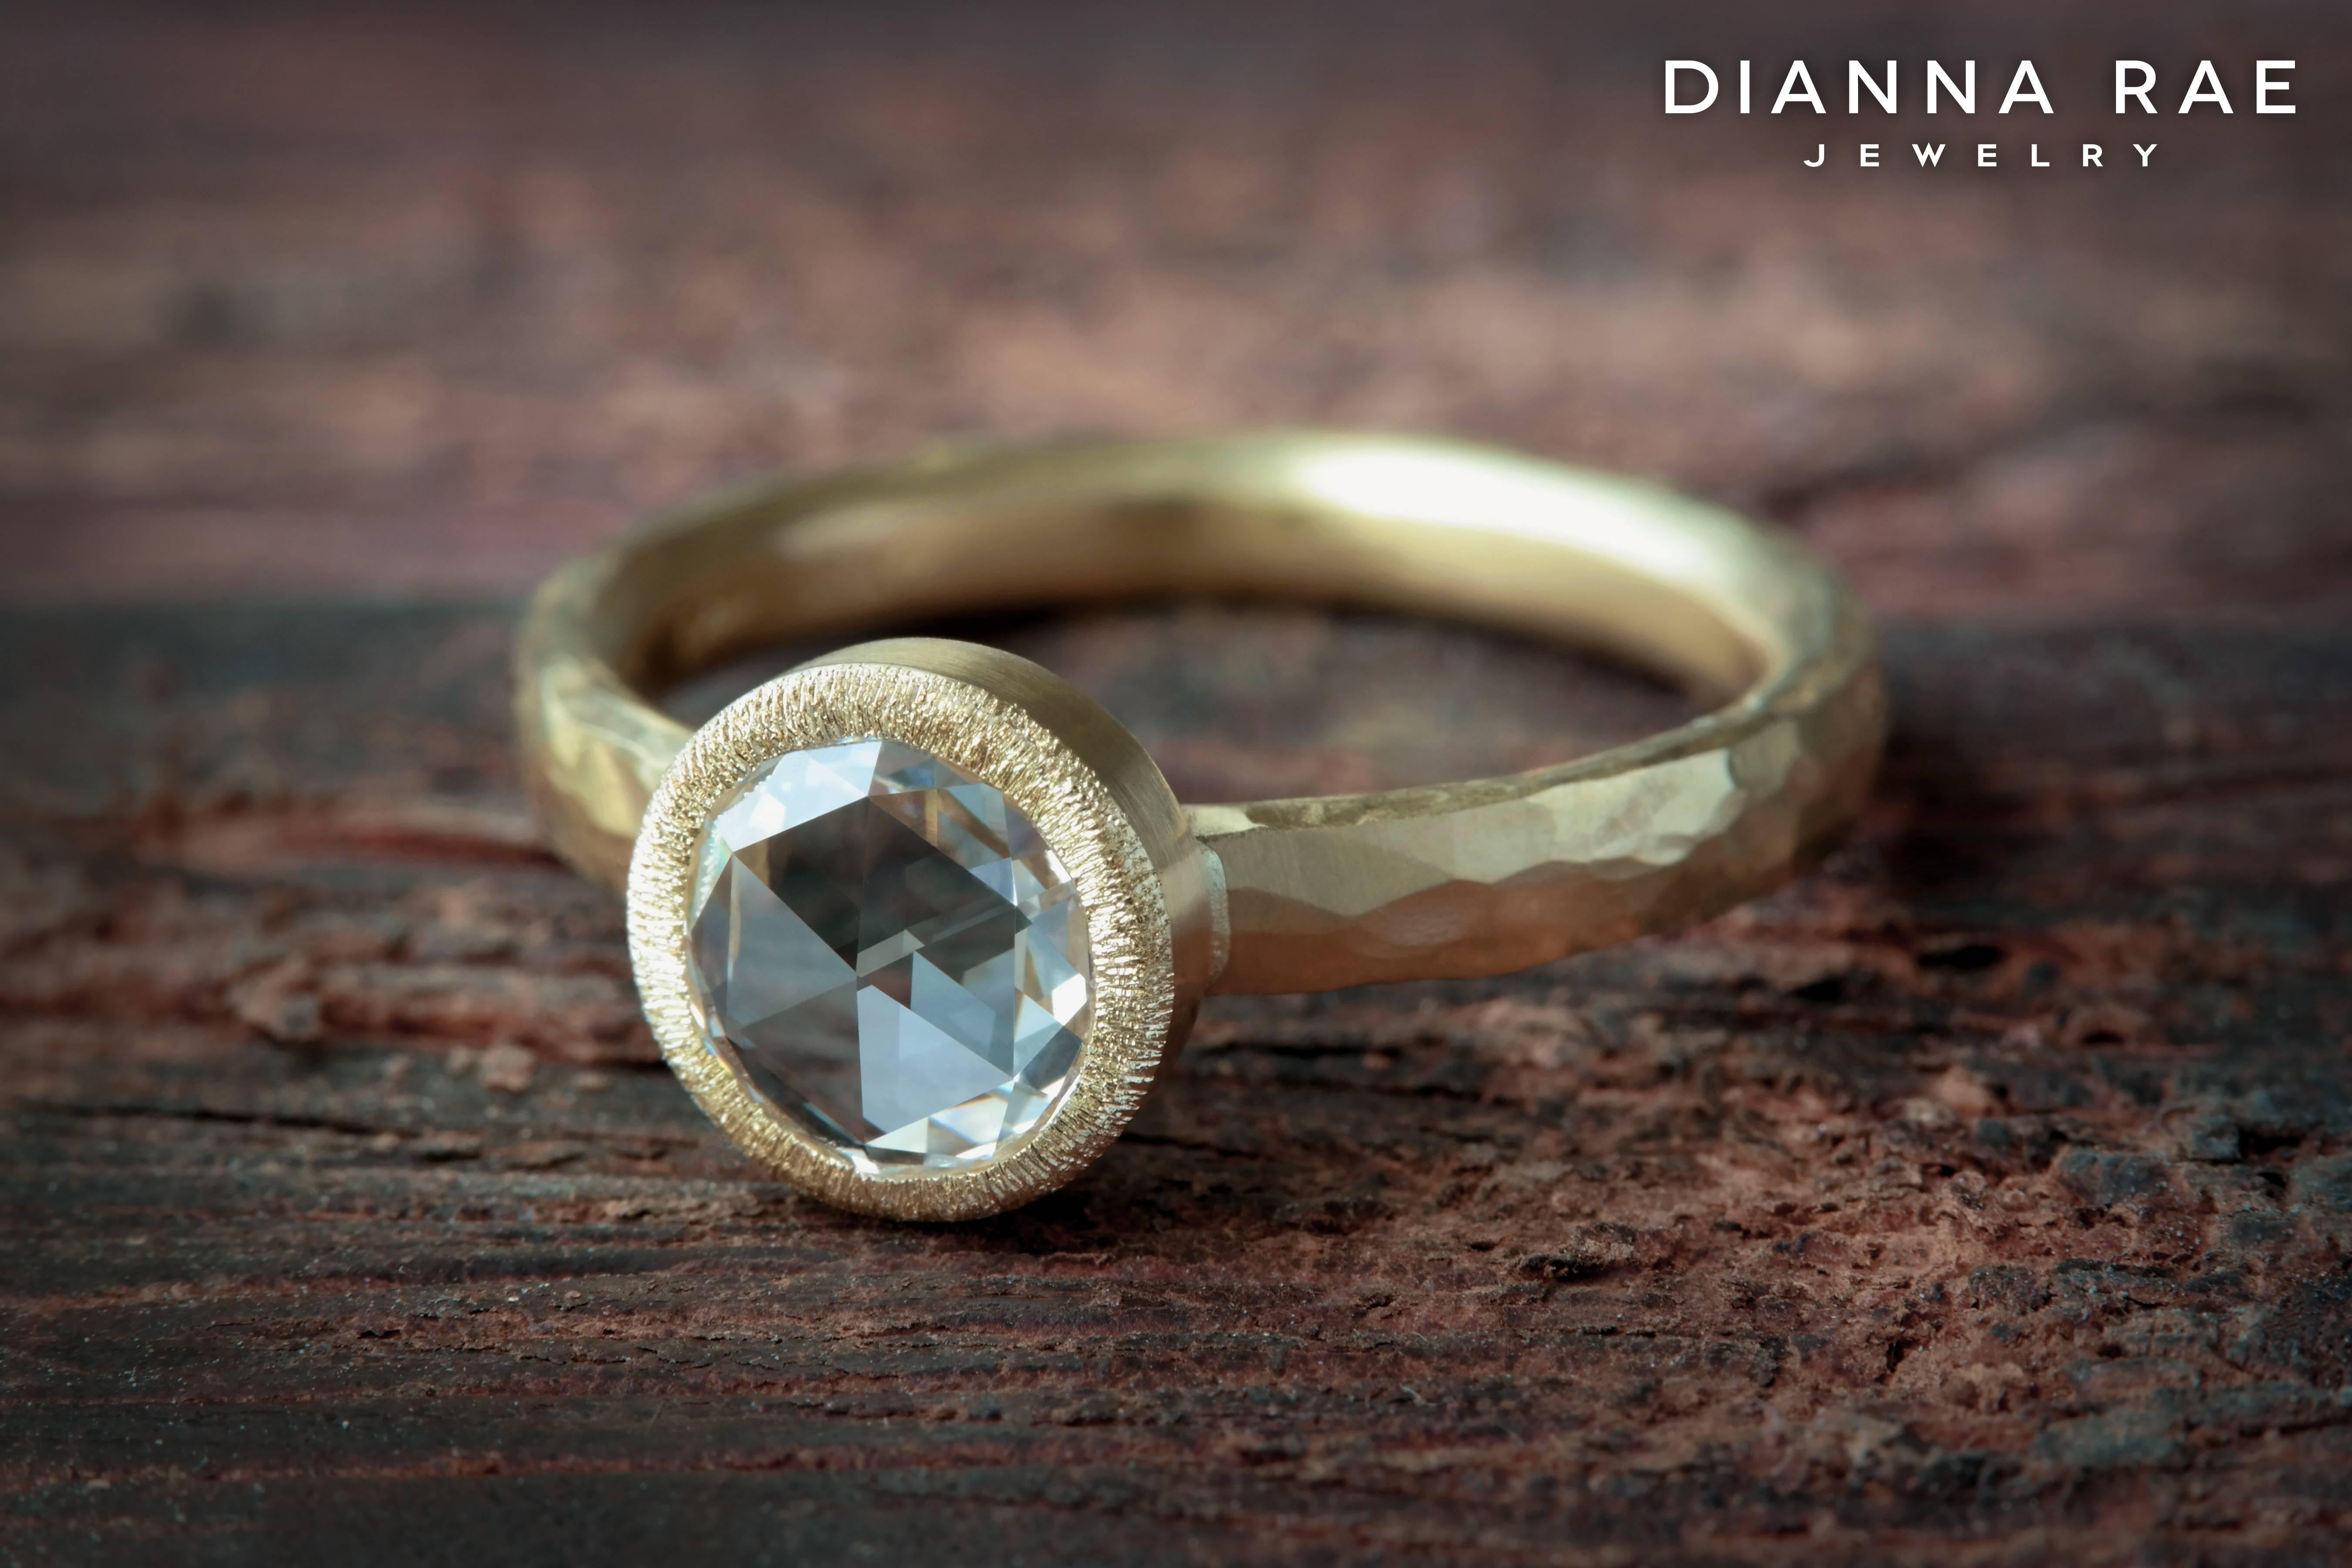 .48ct Bezel Set Rose Cut Diamond Ring with Matte 18K Yellow Gold Hammered Band

This ring was handmade in 18K Yellow Gold.  The .48ct Round Rose Cut diamond is bezel set, VS-1 in clarity and H in color.  My goldsmith added all of the textures by